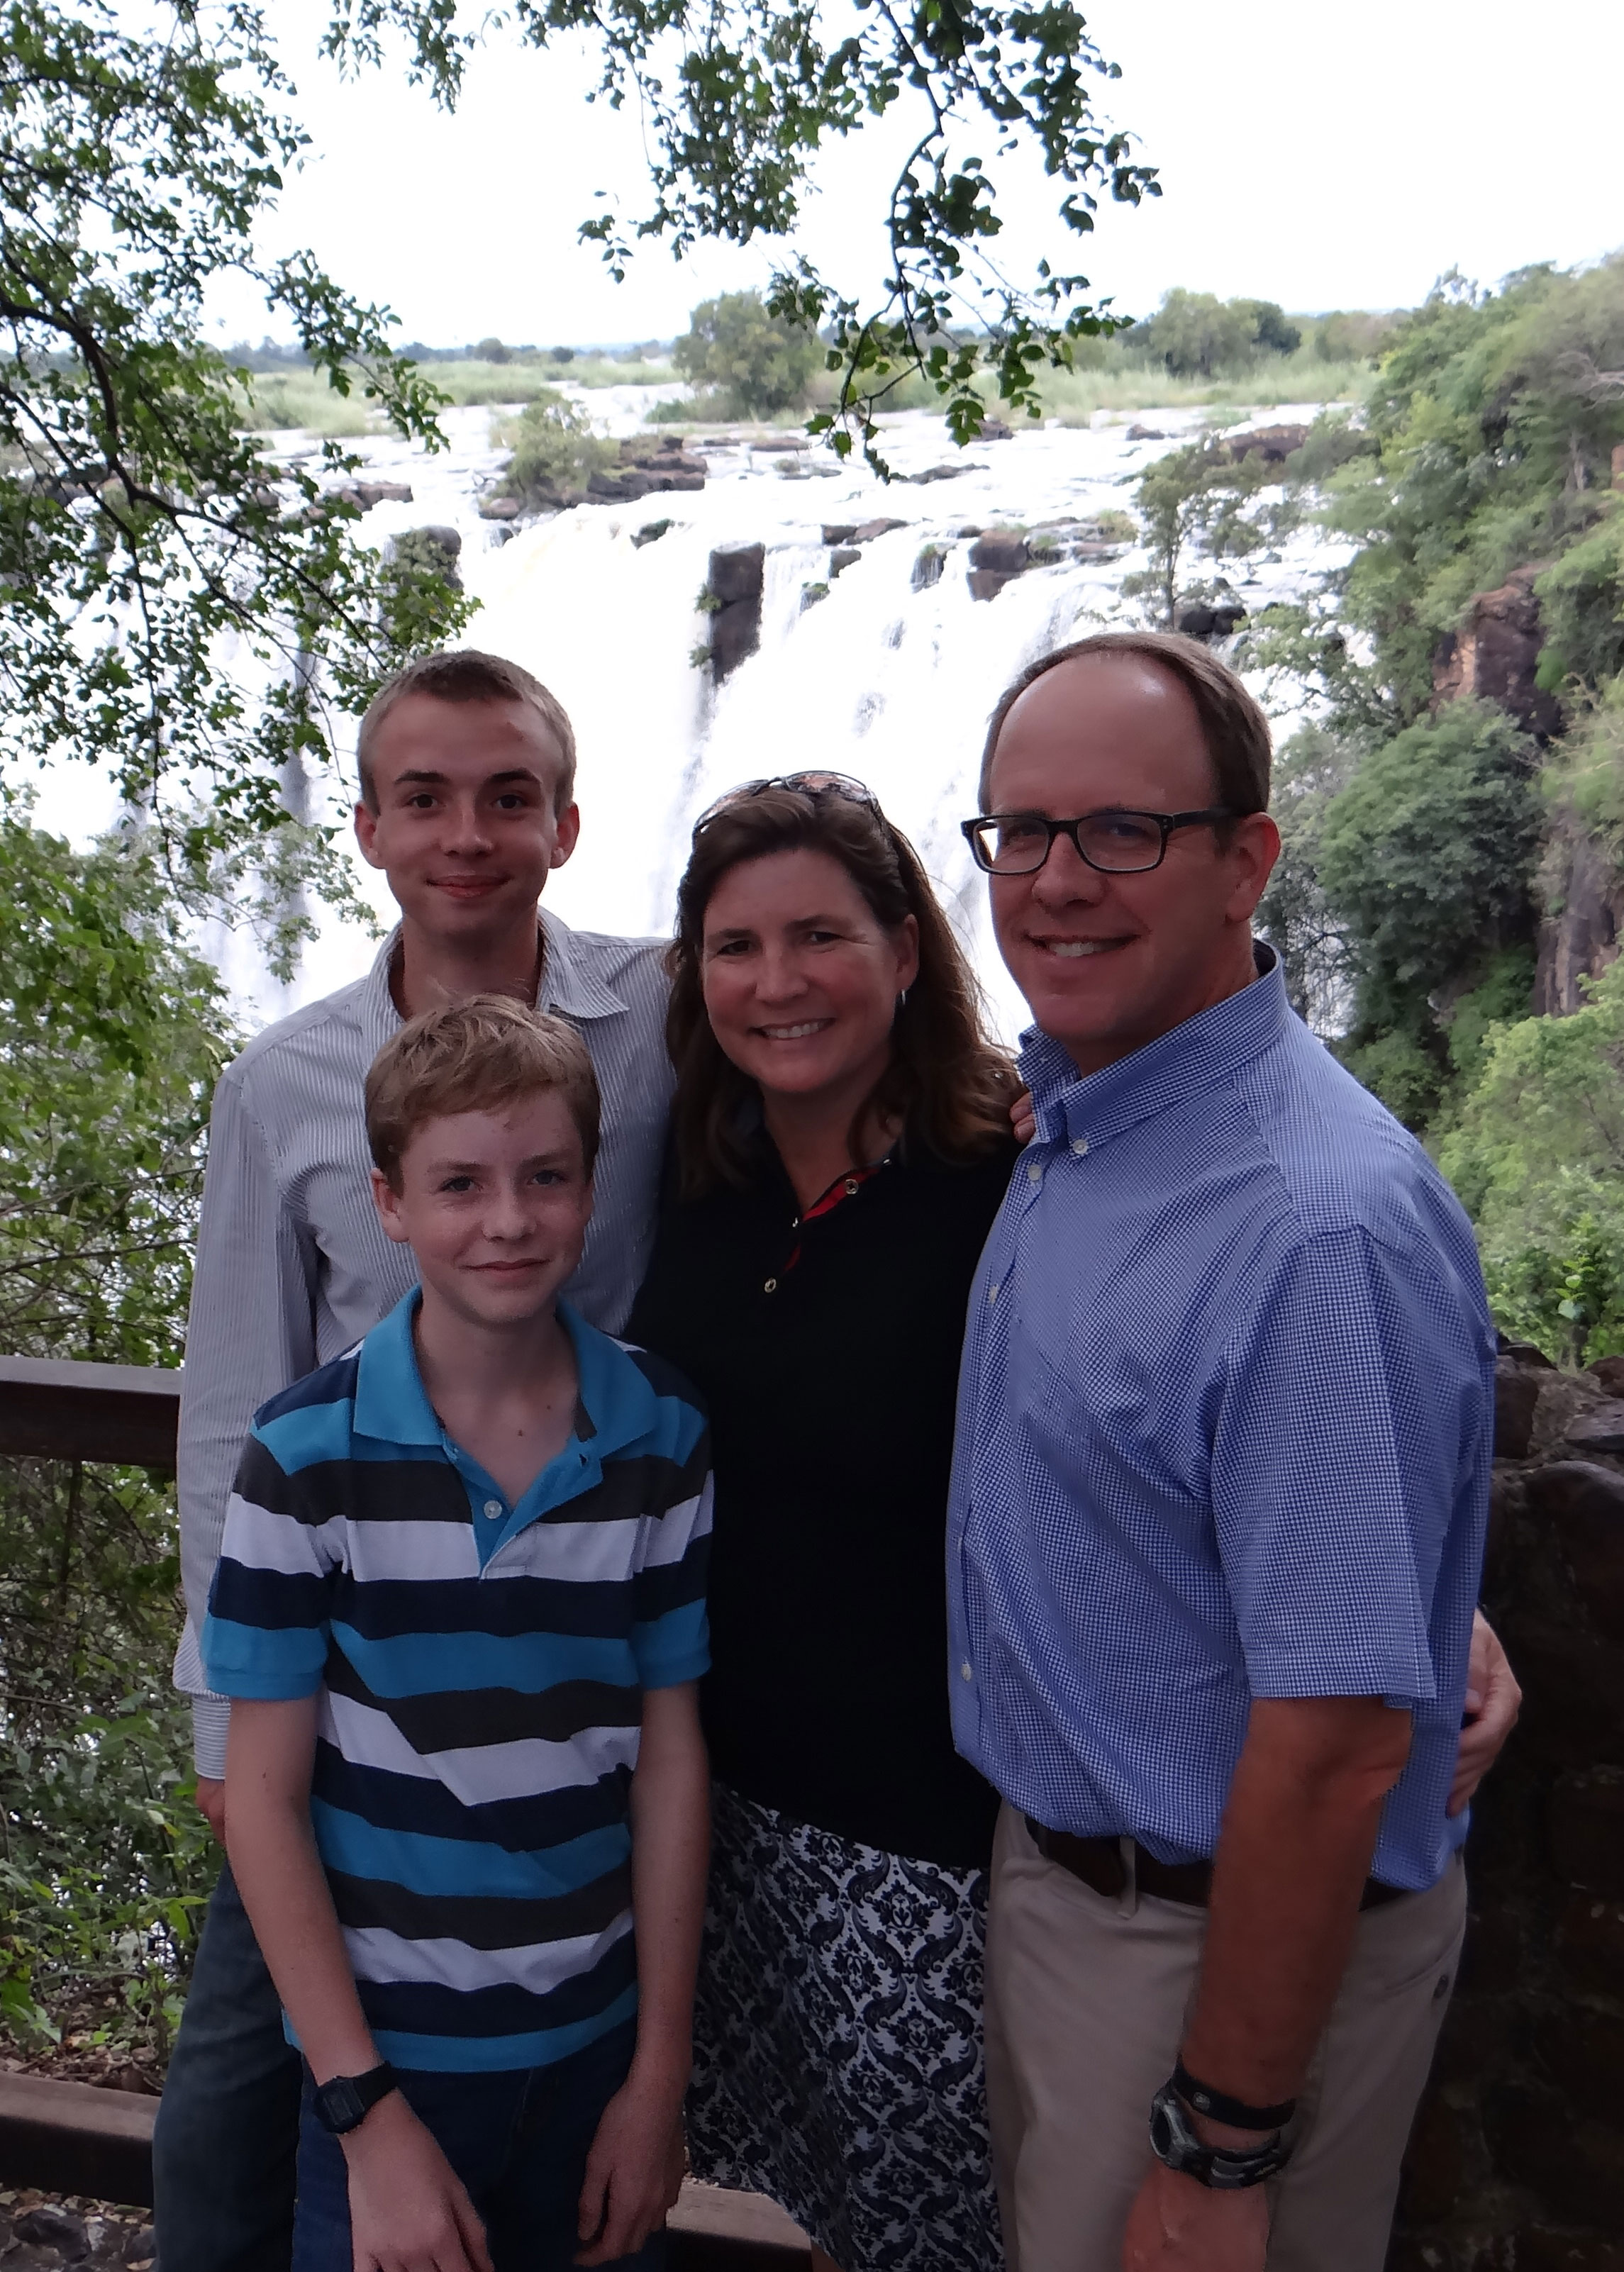 The Ellington family at Victoria Falls (on the Zambia side, of course) in 2015